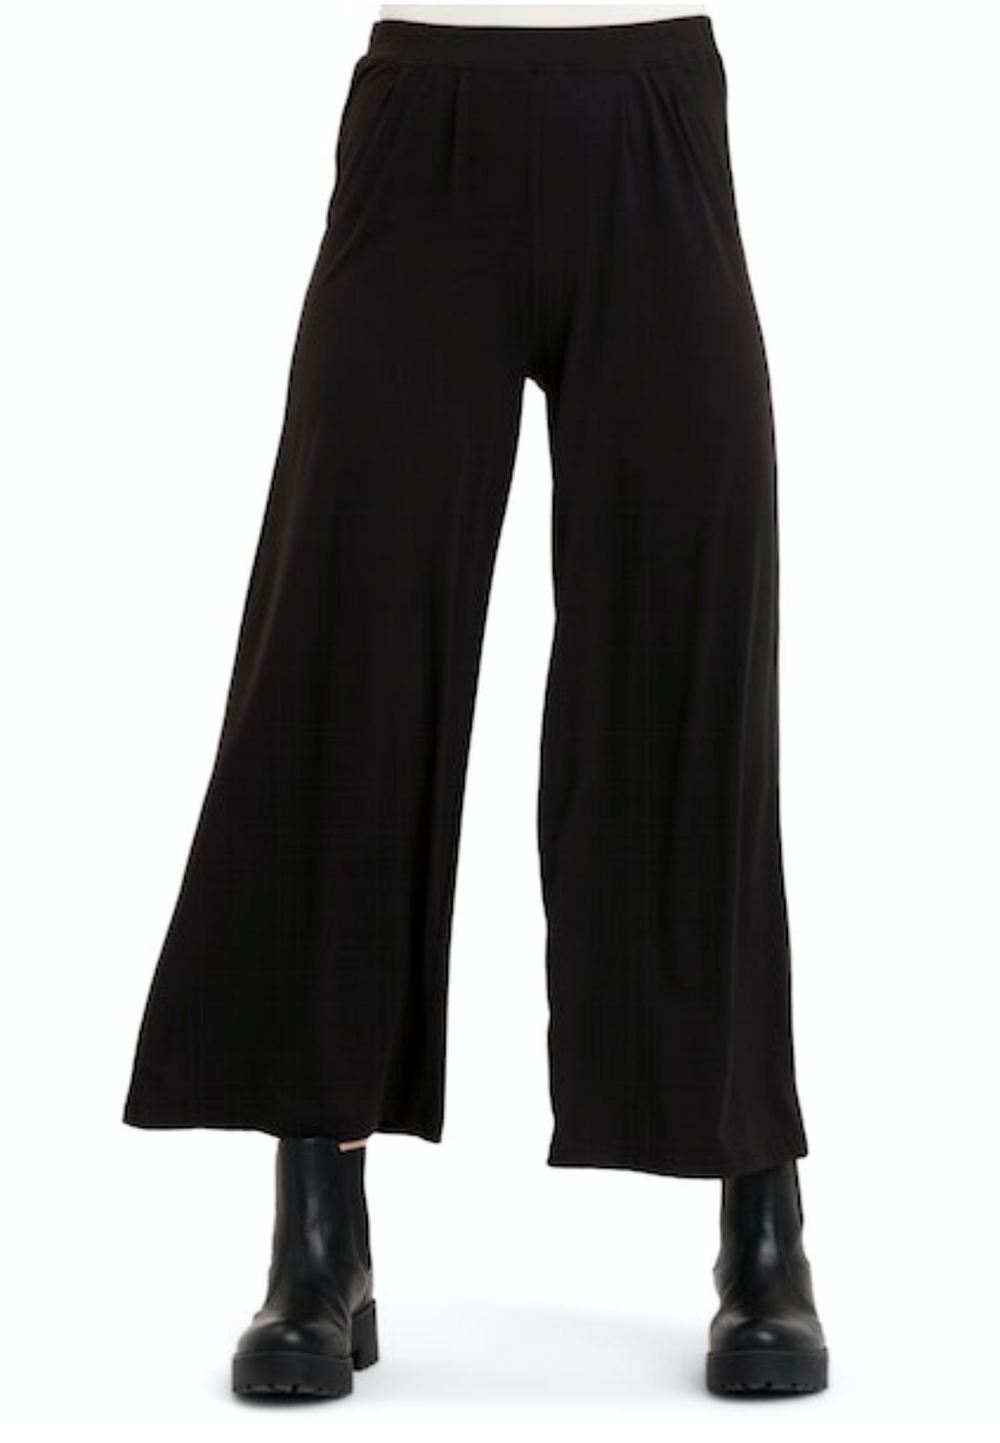 Threads 4 Thought pant, Kennedy wide leg